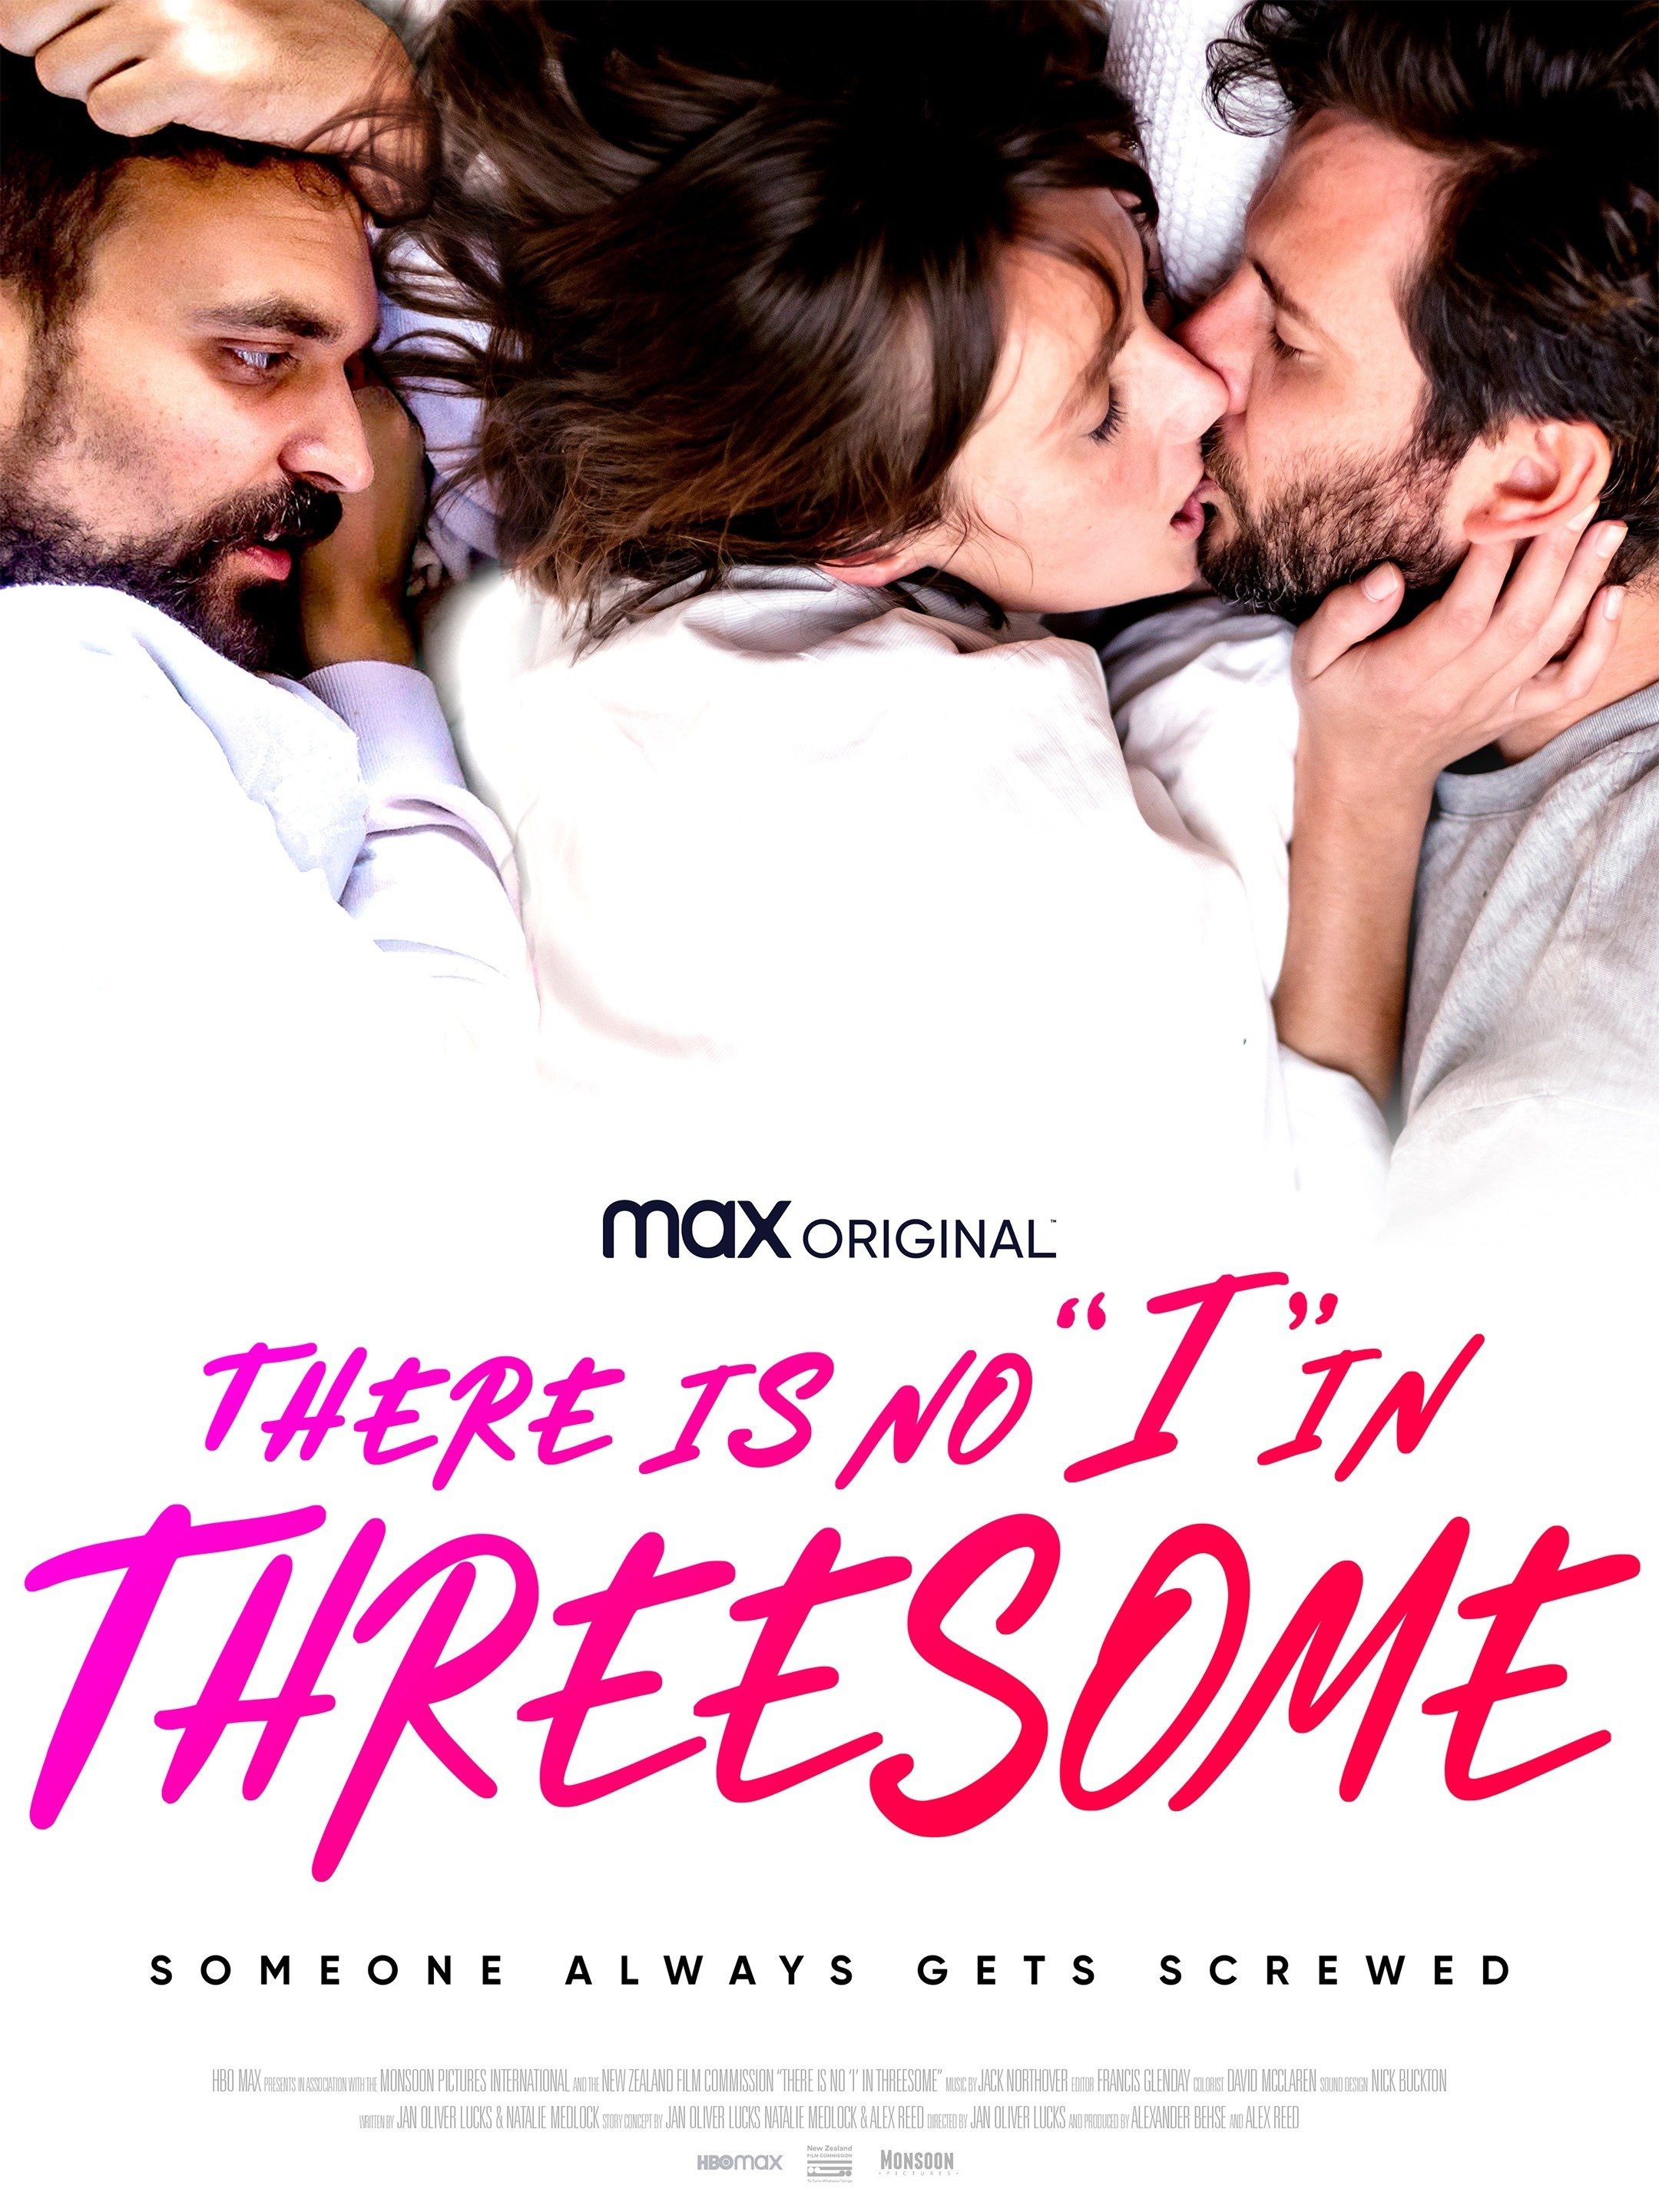 There is No I in Threesome image pic